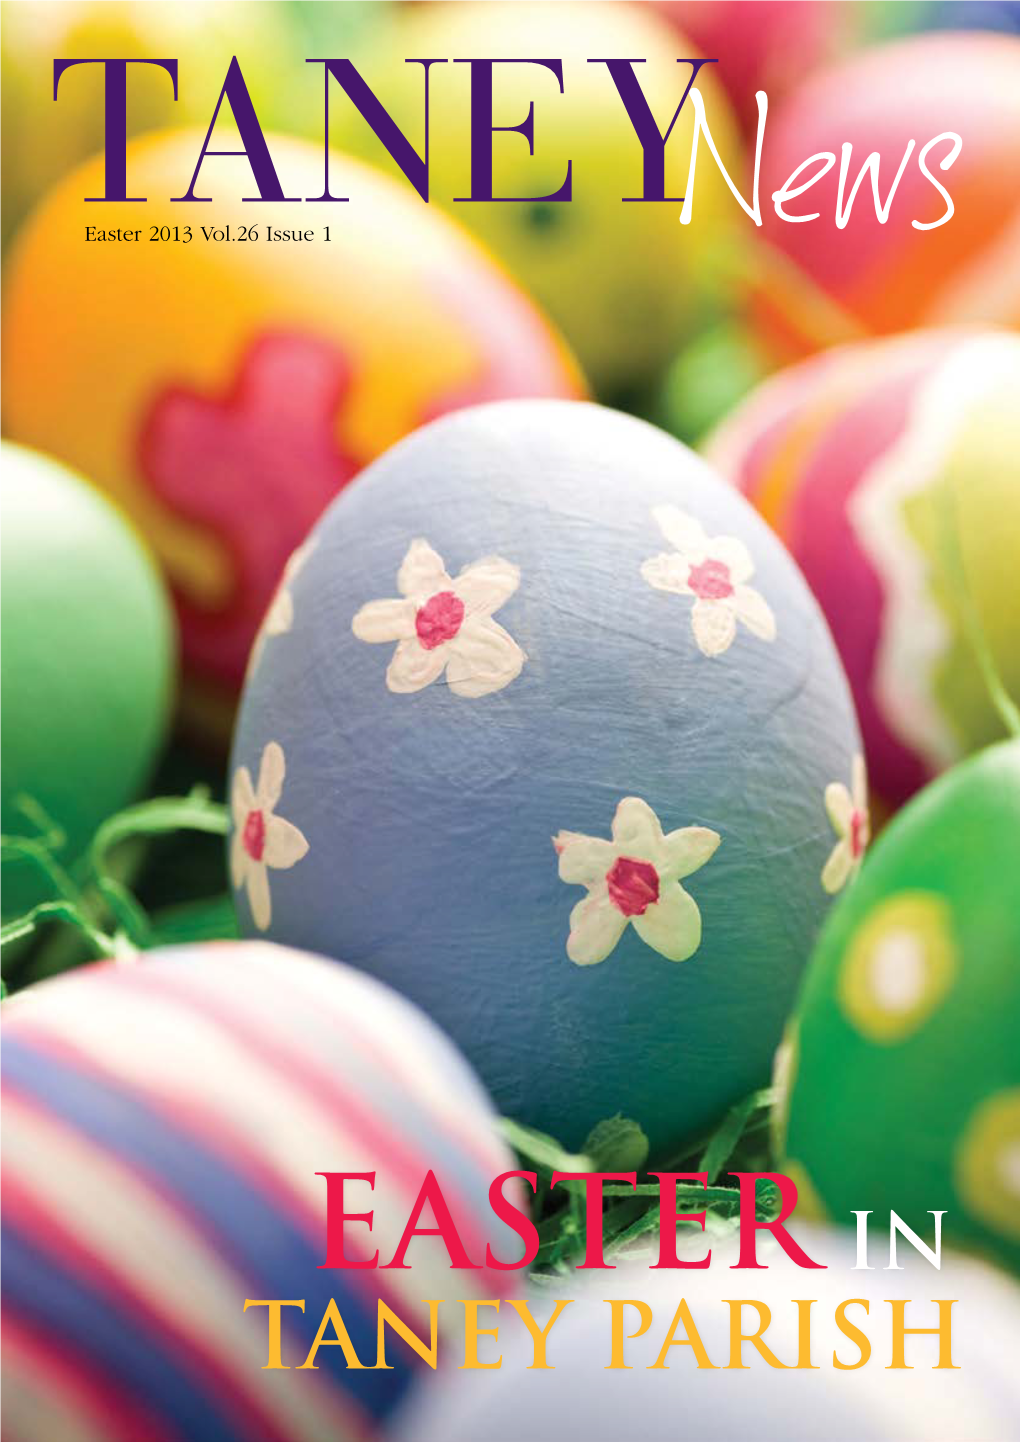 Easter 2013 Vol.26 Issue 1